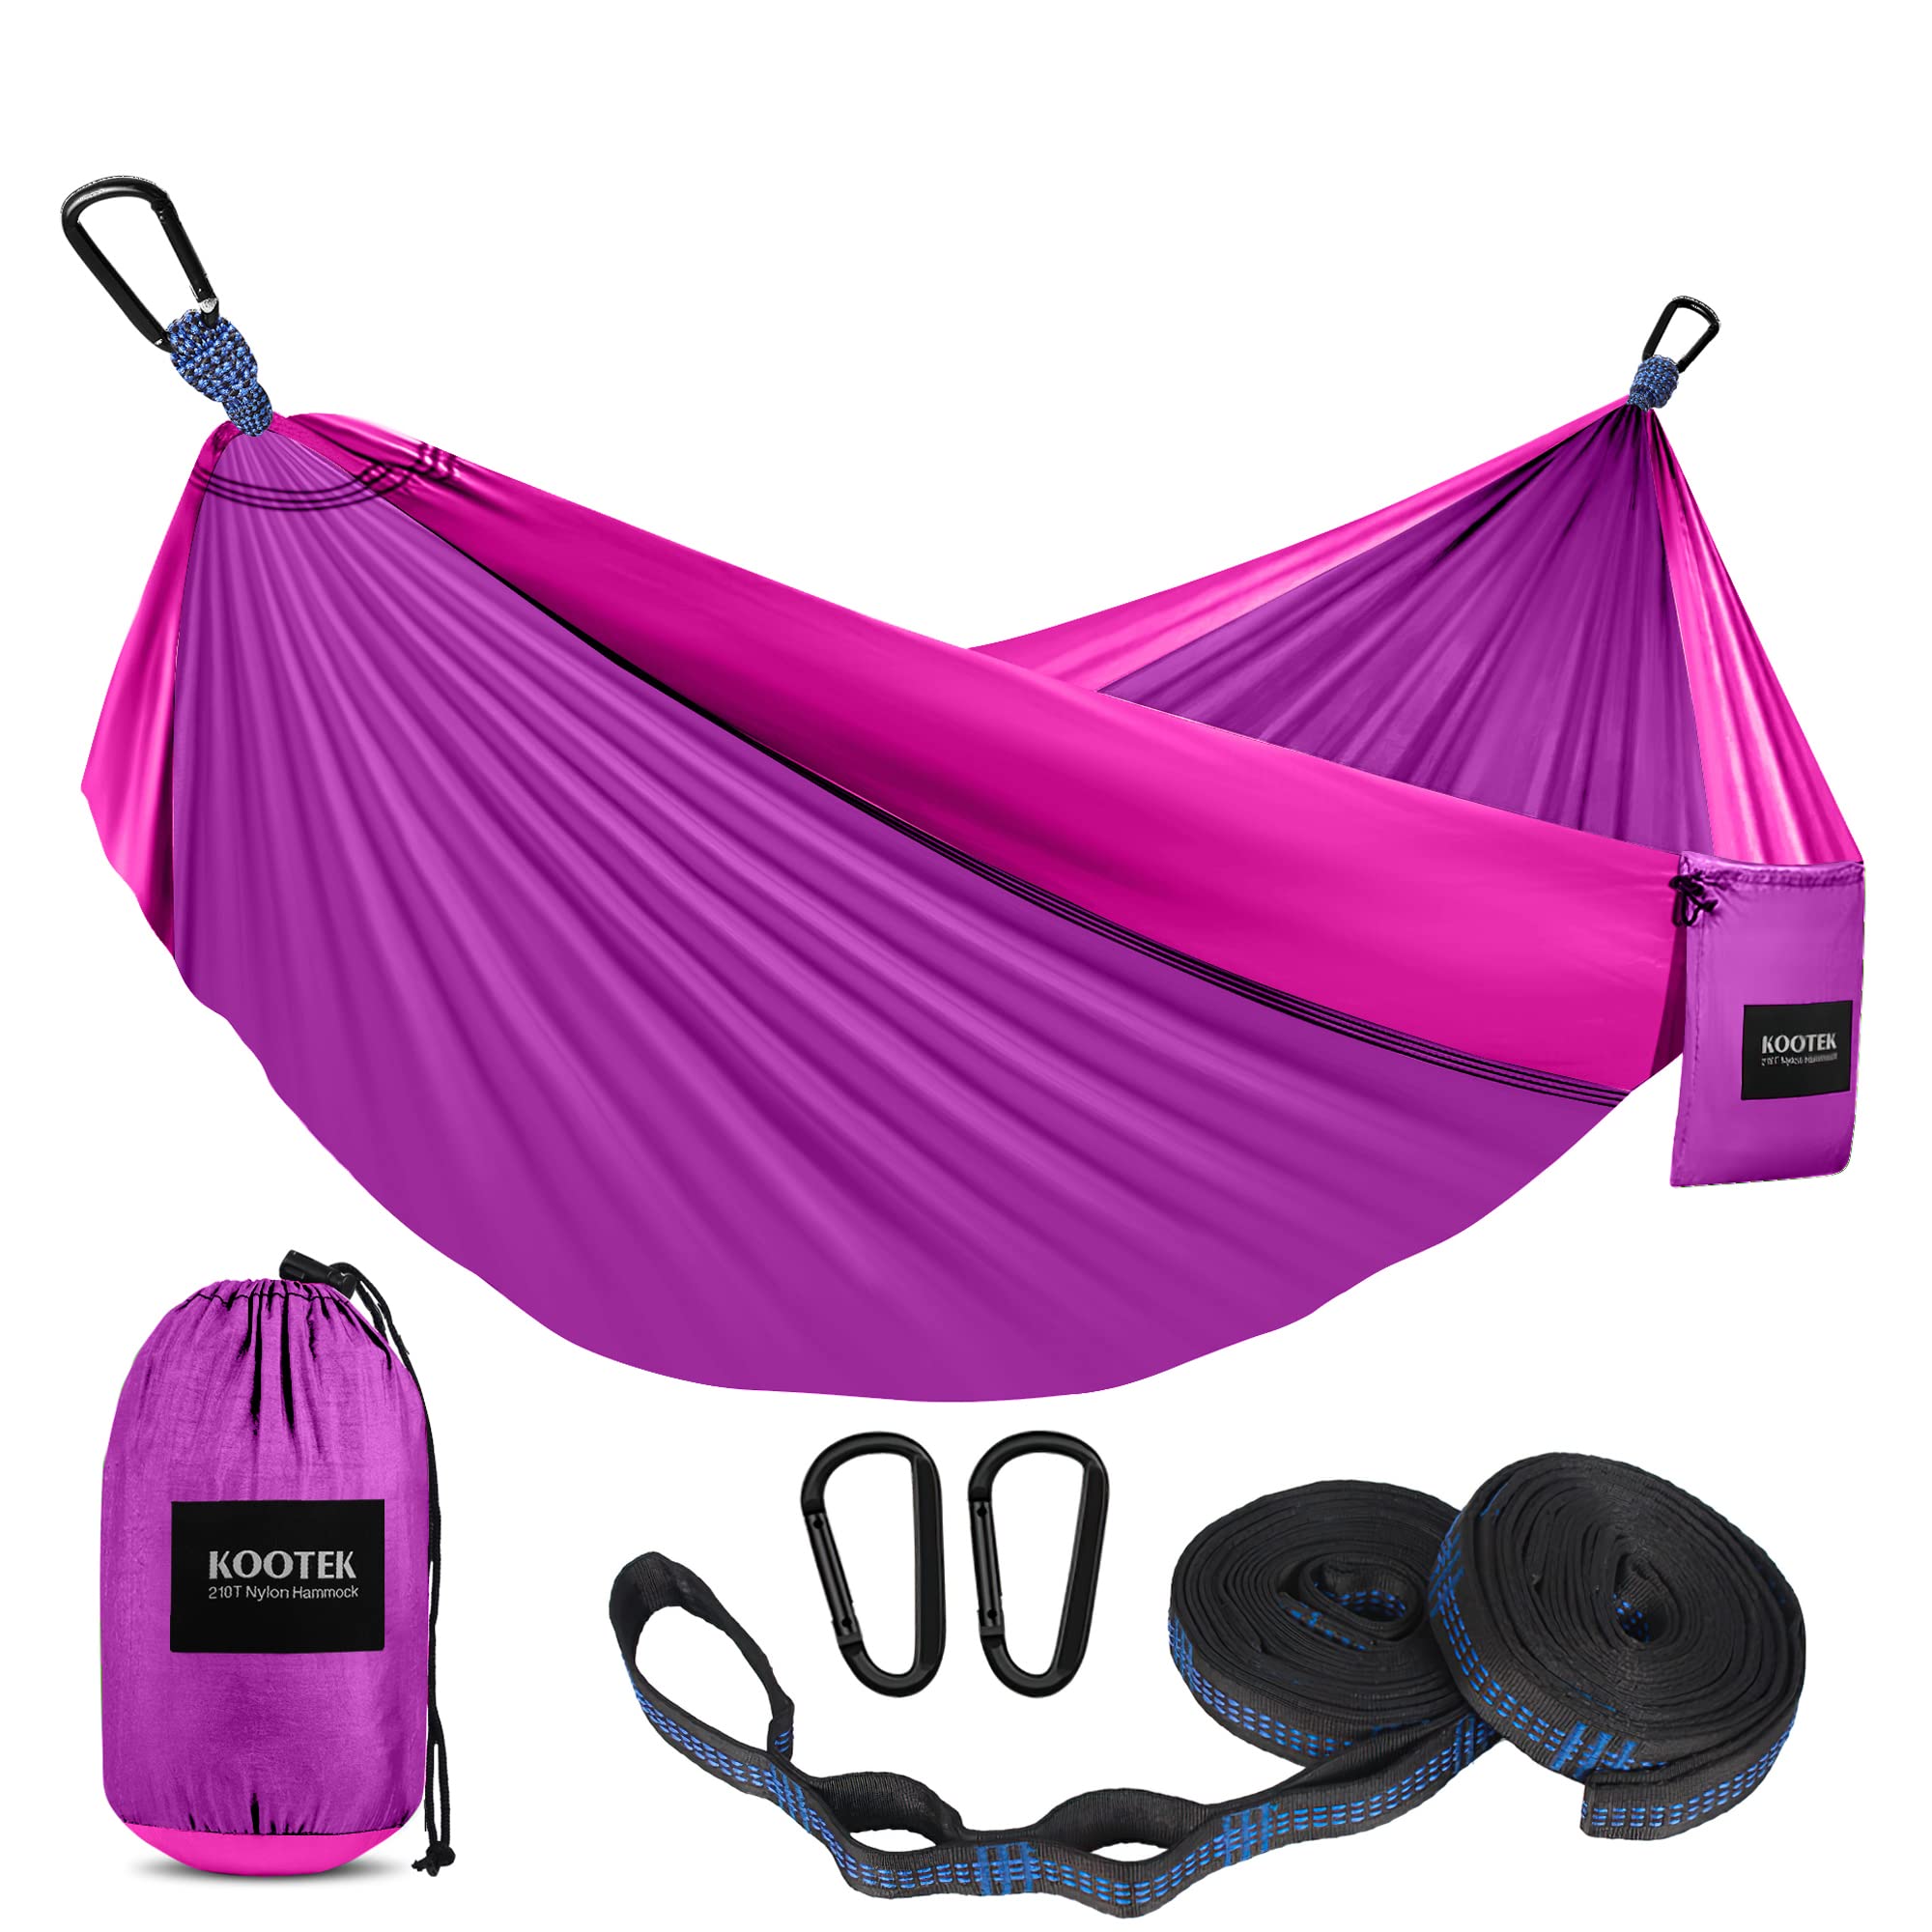 Kootek Camping Hammock Double & Single Portable Hammocks Camping Accessories for Outdoor, Indoor, Backpacking, Travel, Beach, Backyard, Patio, Hiking, Bright Violet & Pink